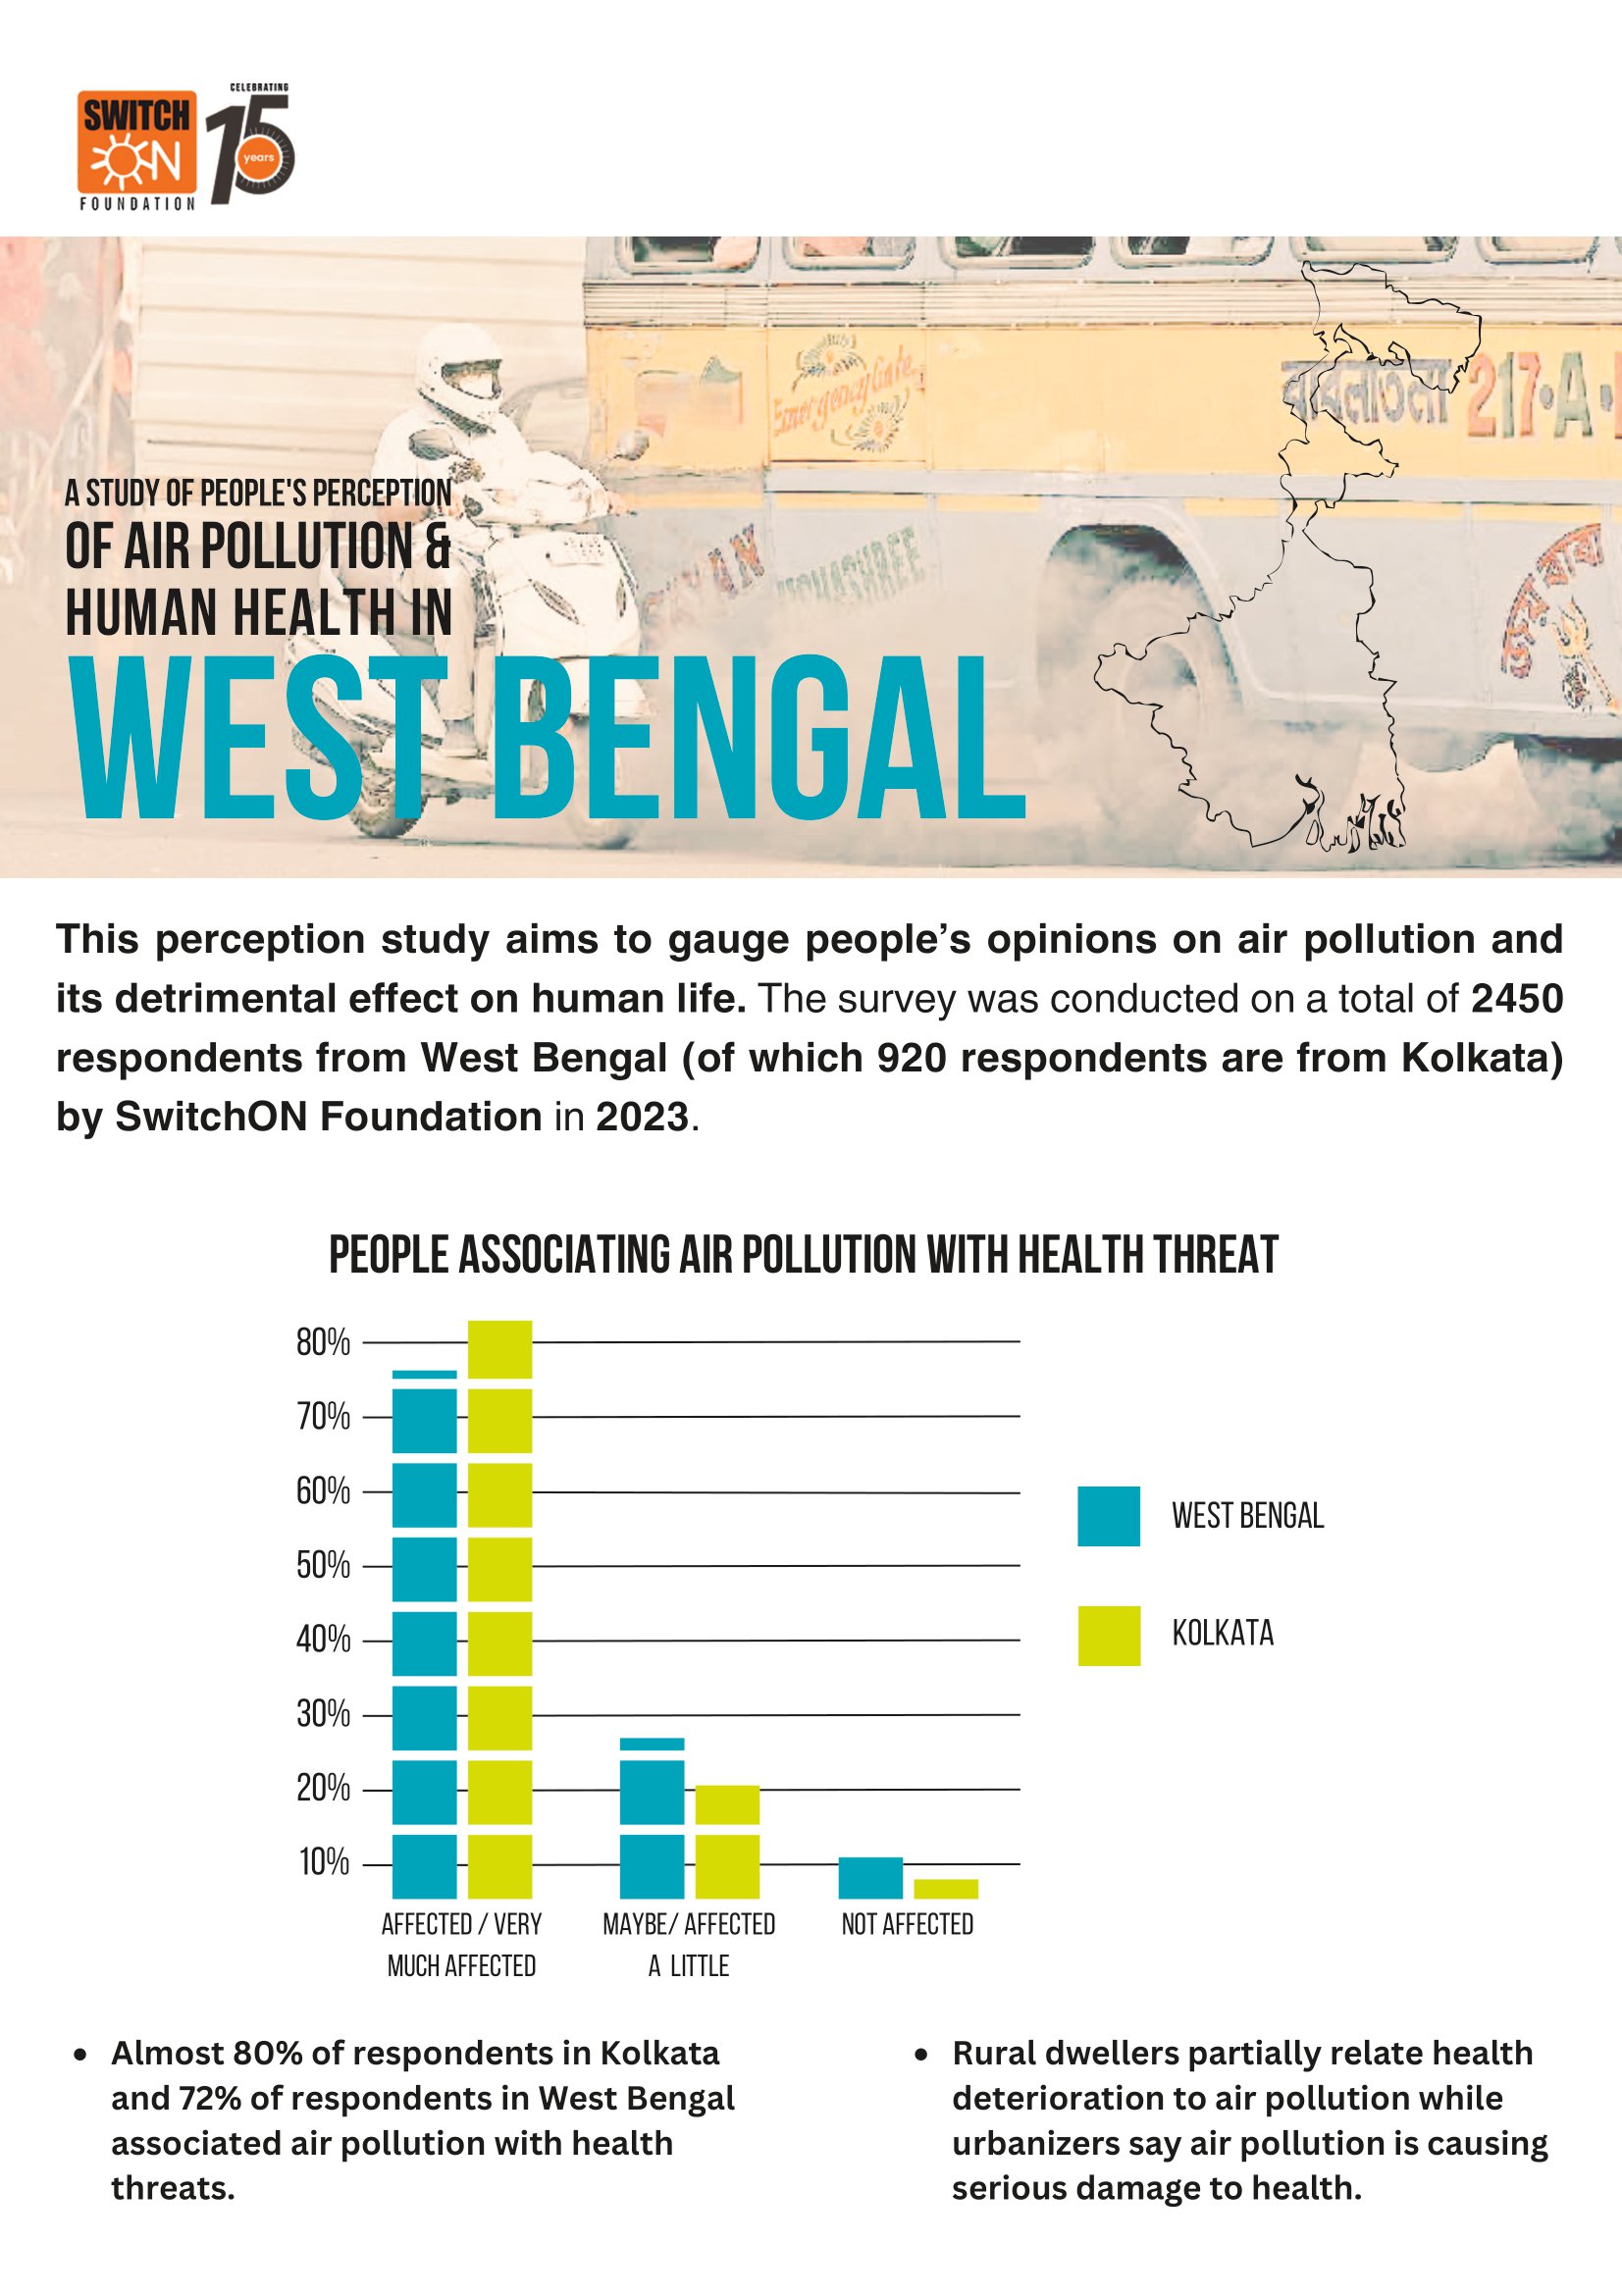 A Perception Study of Air Pollution & Human Health | West Bengal Infobrief